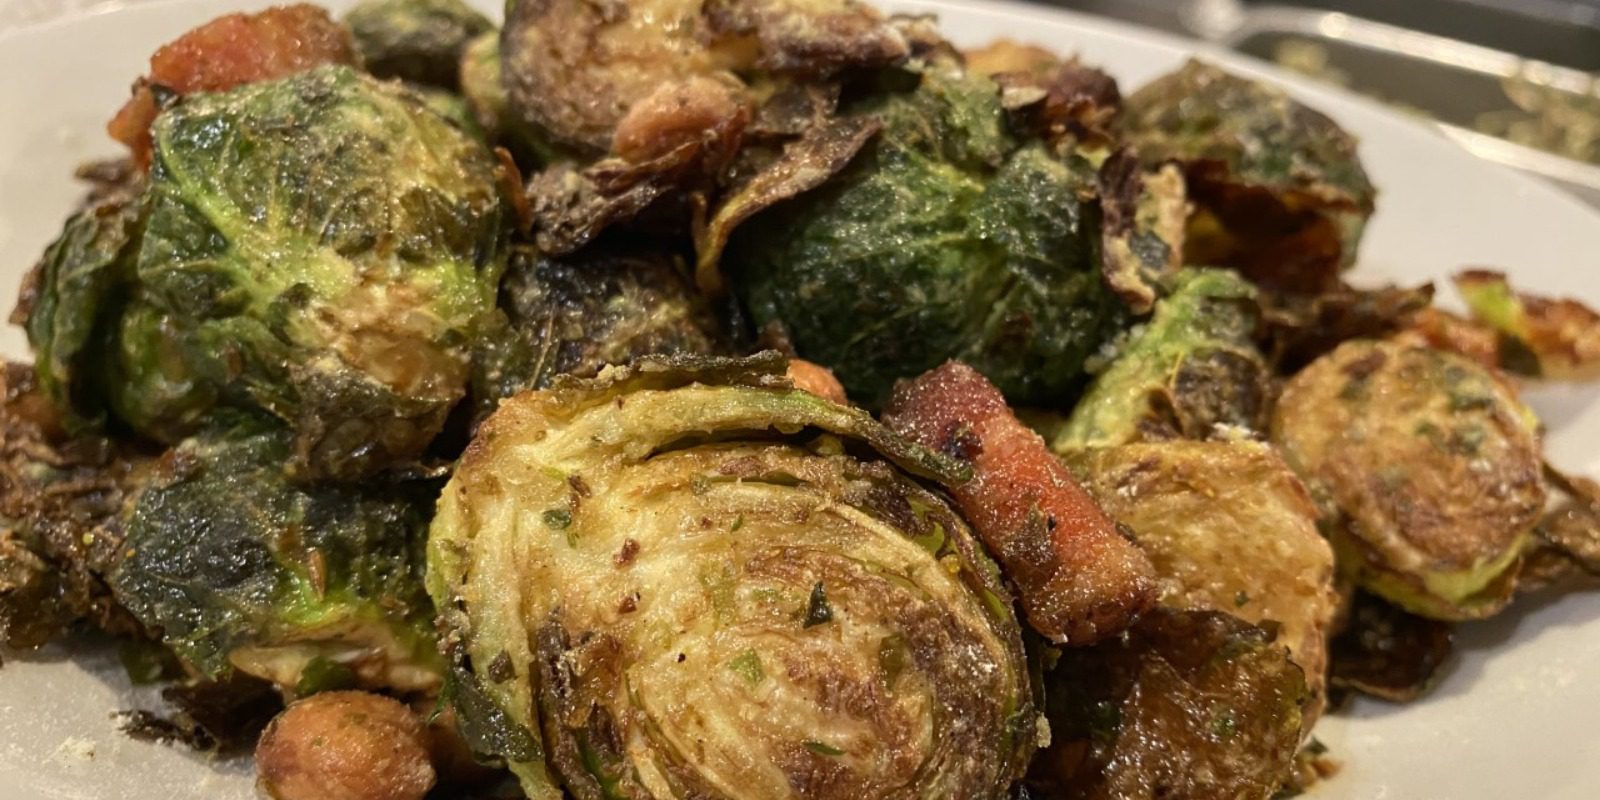 Peanut brussel sprouts